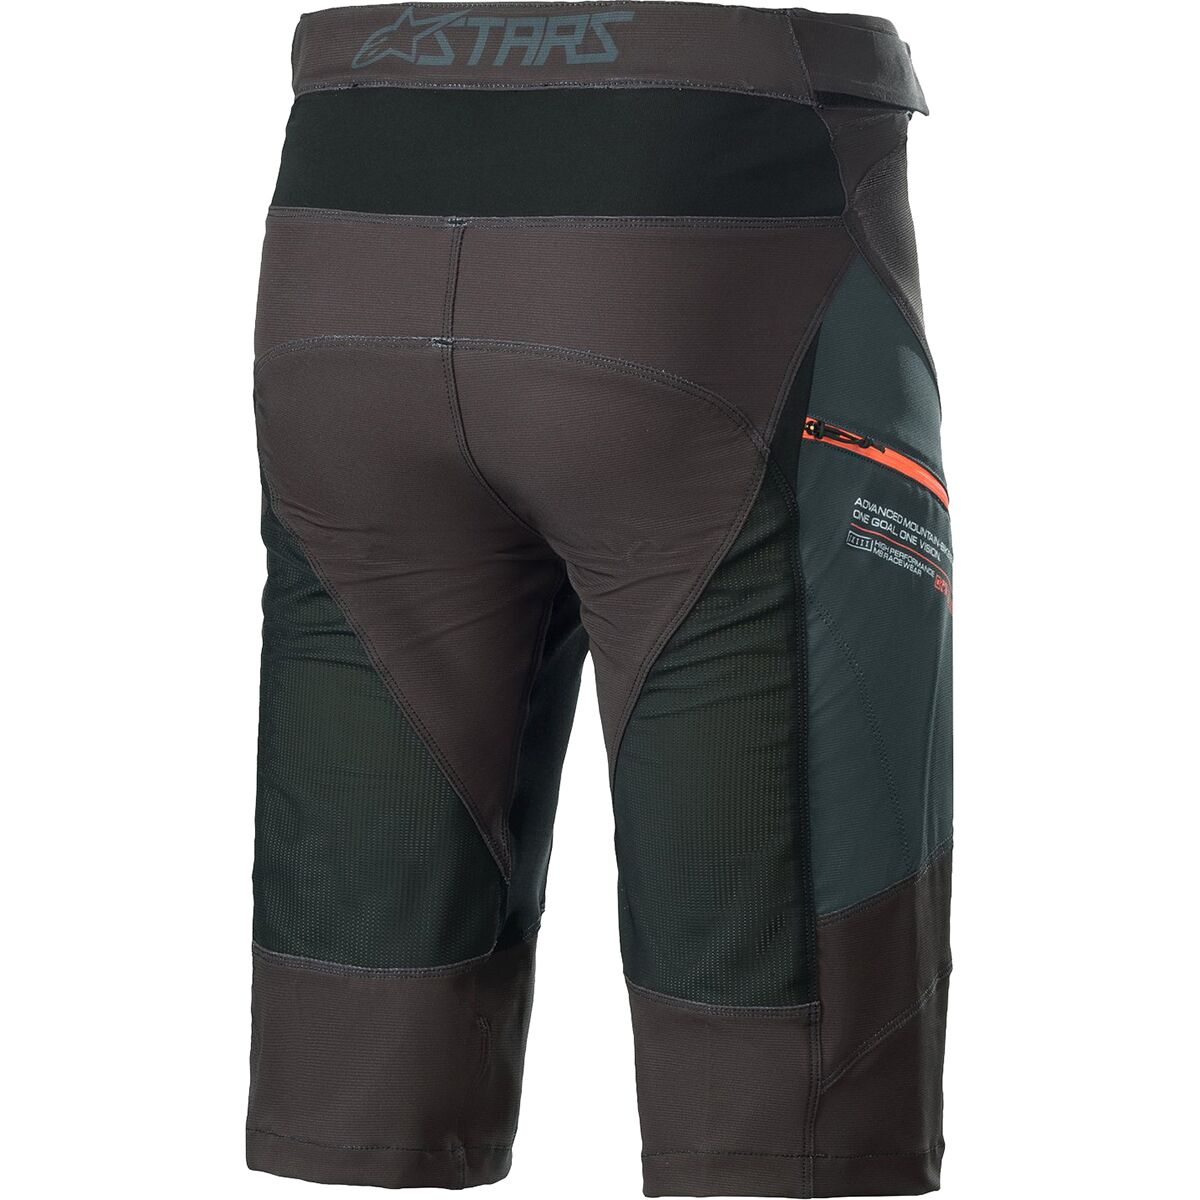 Viewing Images For Alpinestars Drop 8.0 Shorts :: MotorcycleGear.com